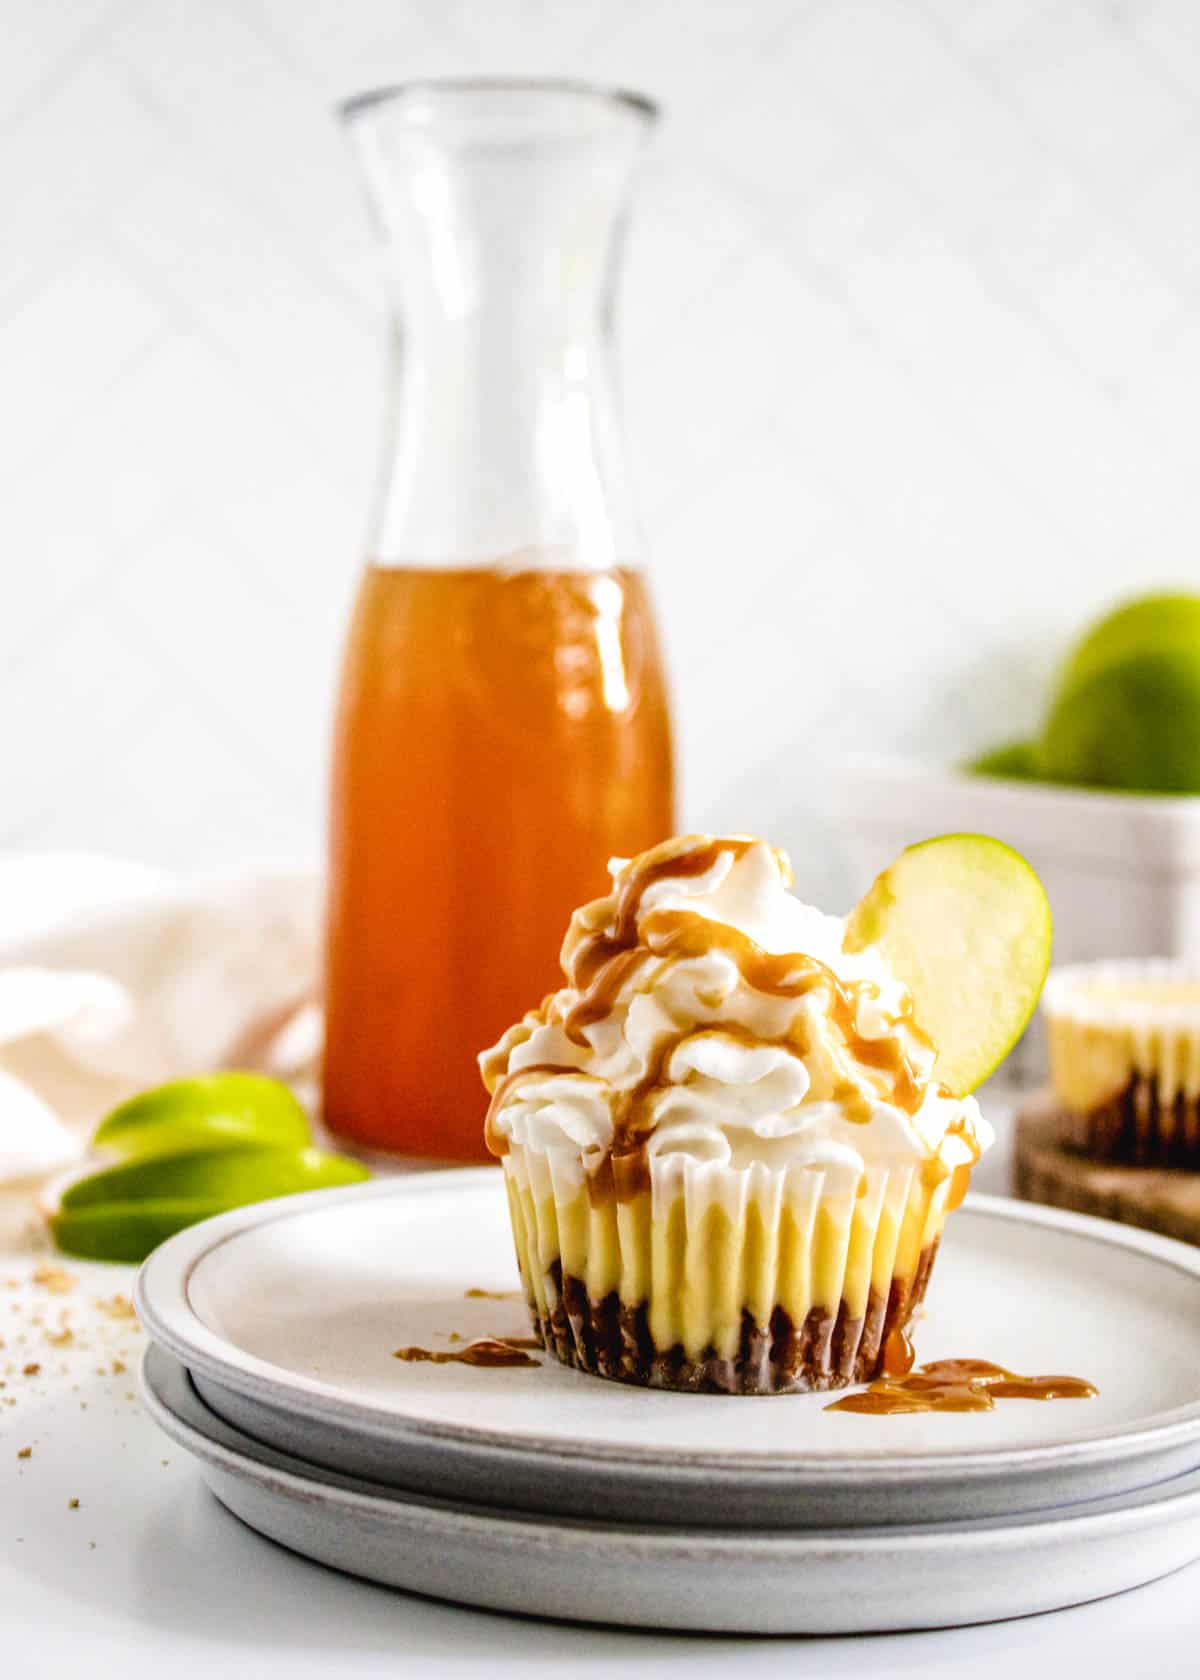 A plate with a mini caramel apple cheesecake with sliced apples and a jar of caramel in the background.